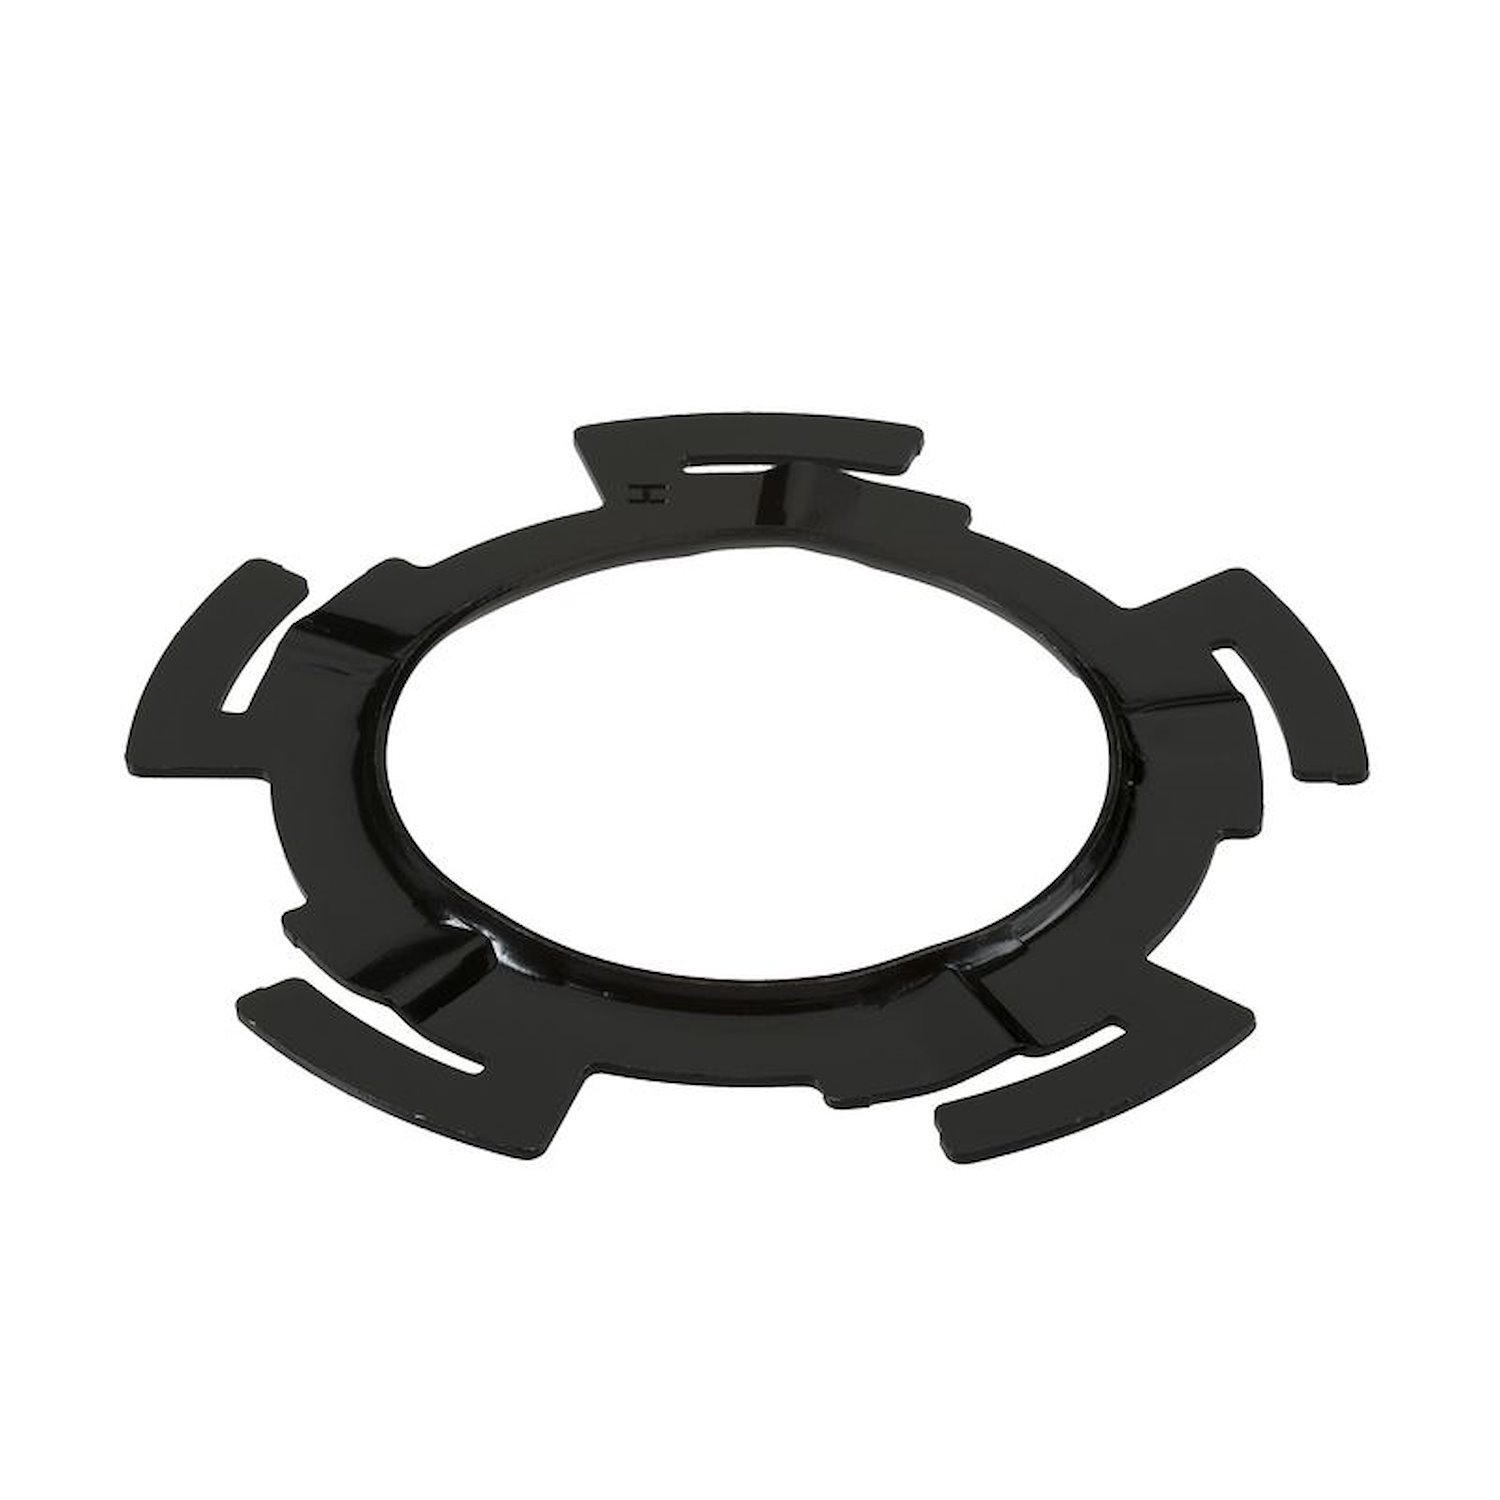 Fuel Tank Lock Ring for 1995-2009 GM Vehicles